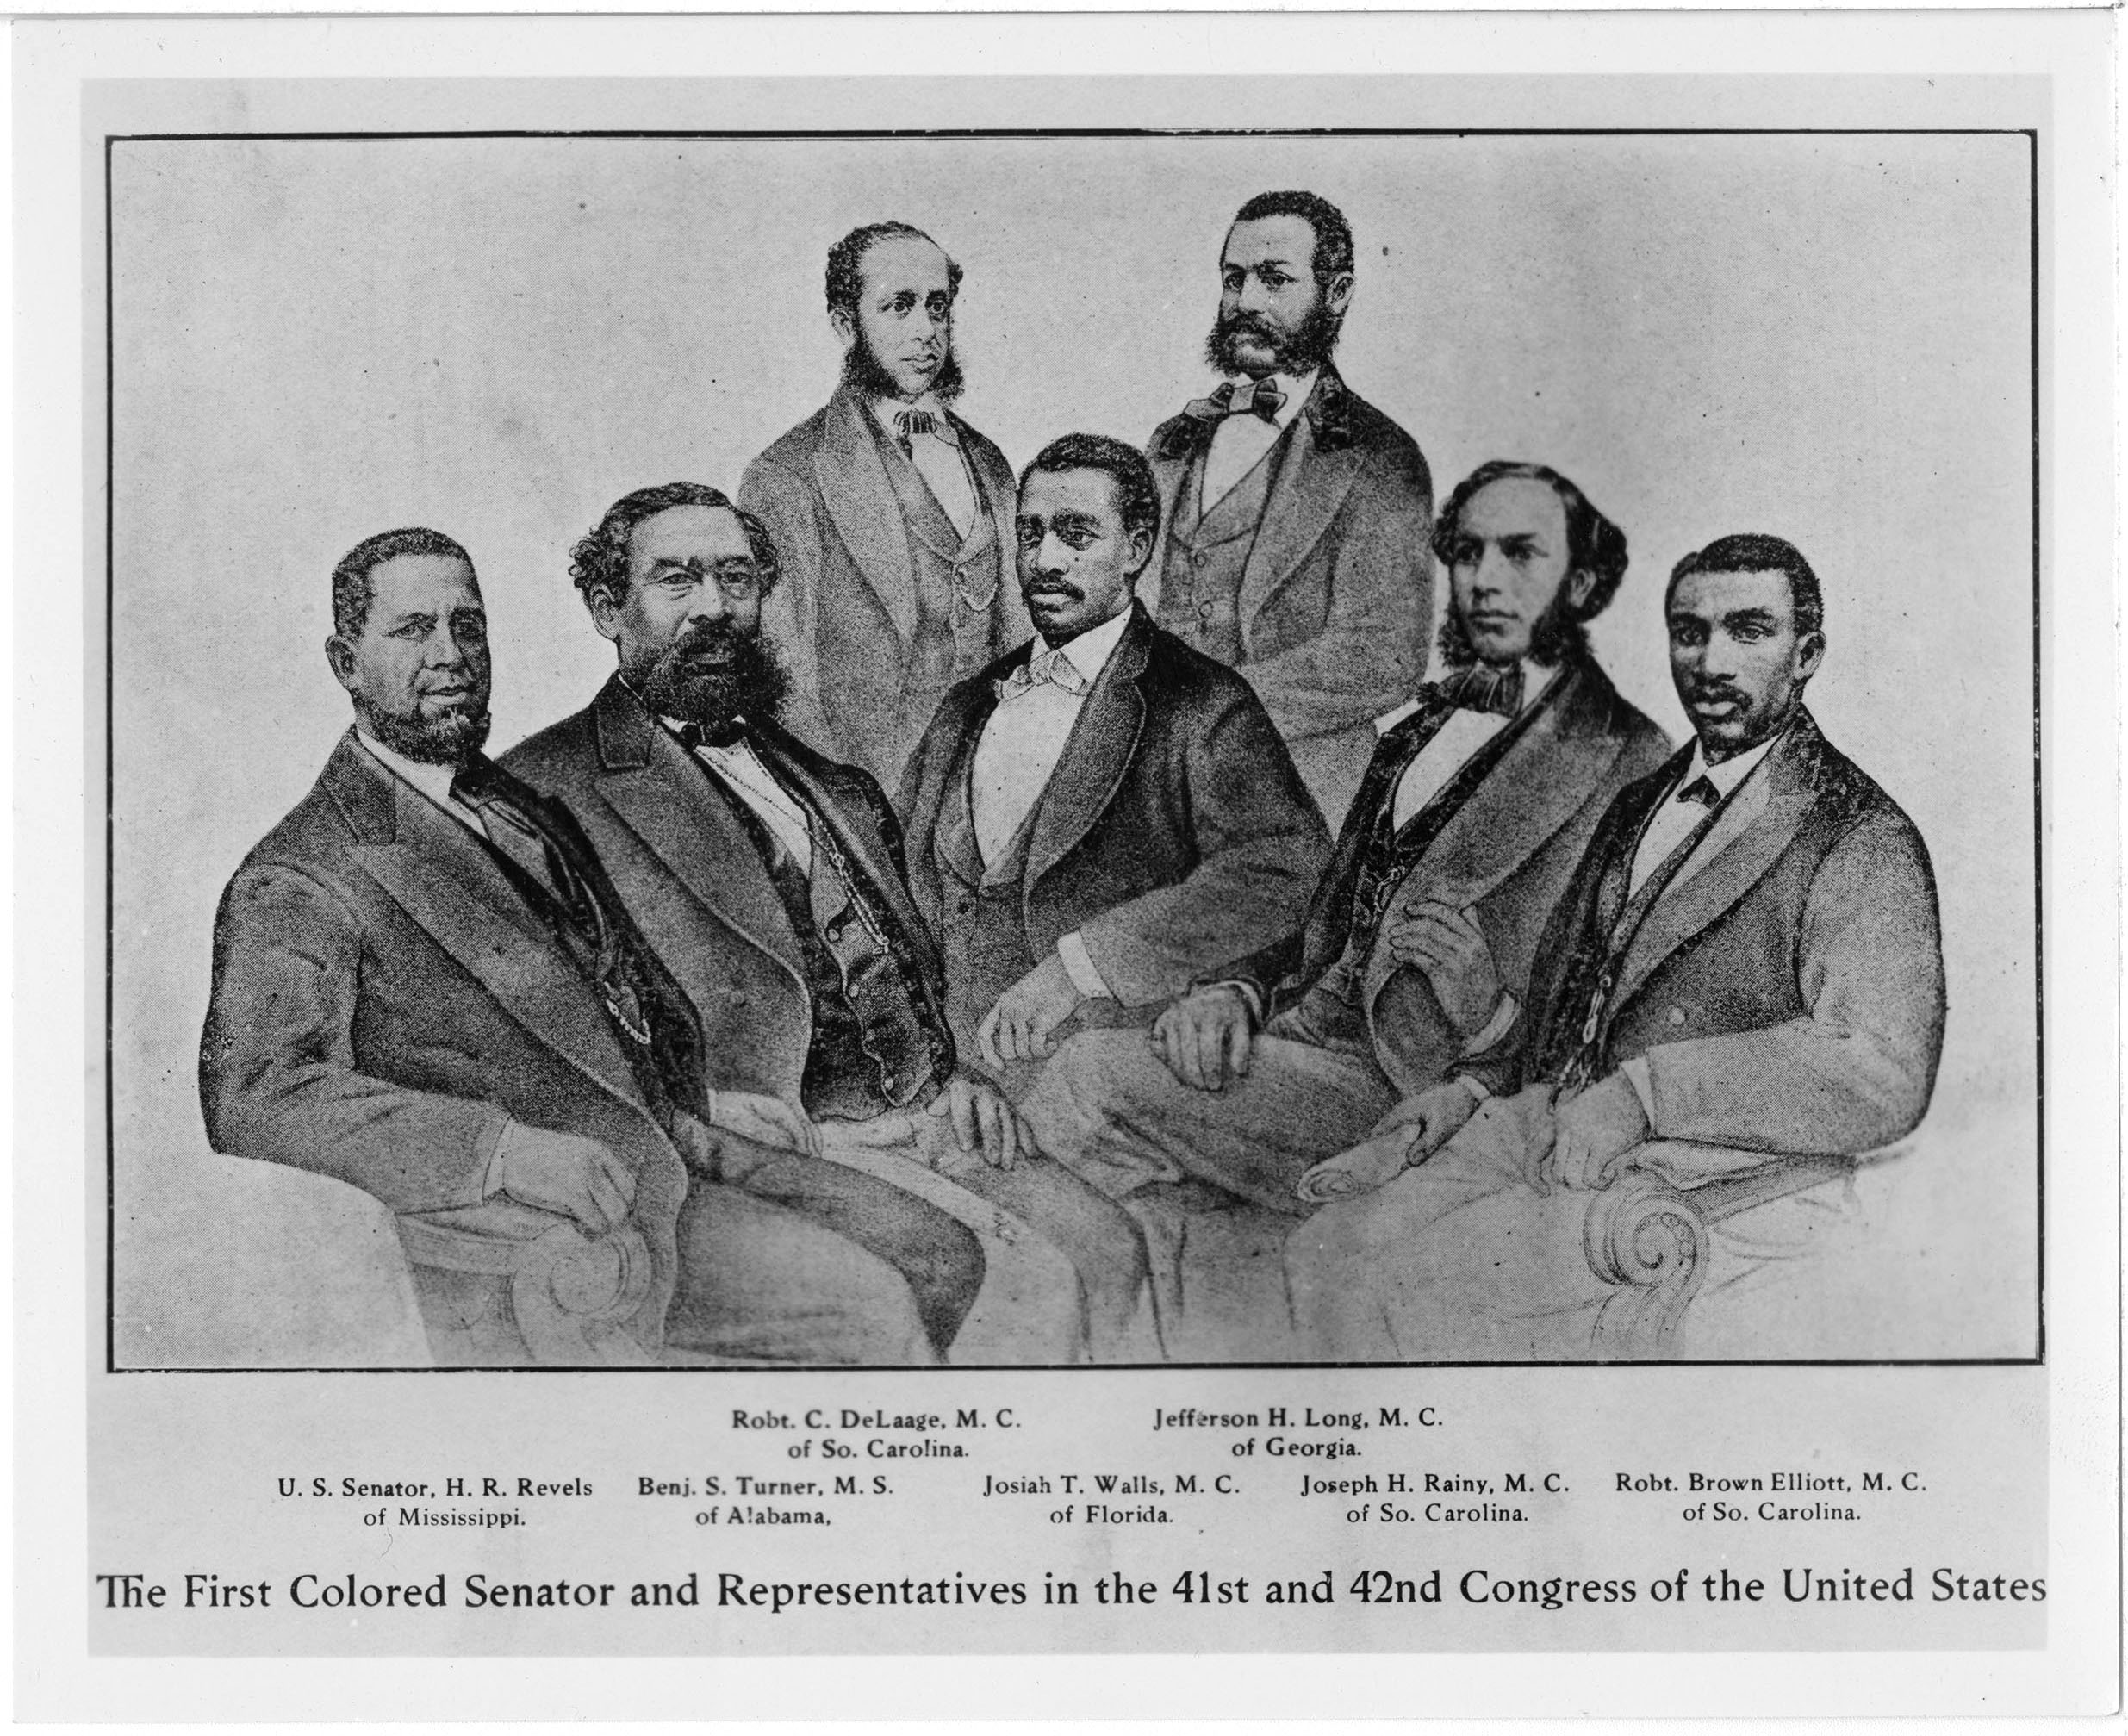 The First Colored Senator and Representatives in the 41st and 42nd Congress of the United States,,undated,Rucker, Aiken, Mollison, Harper Family papers